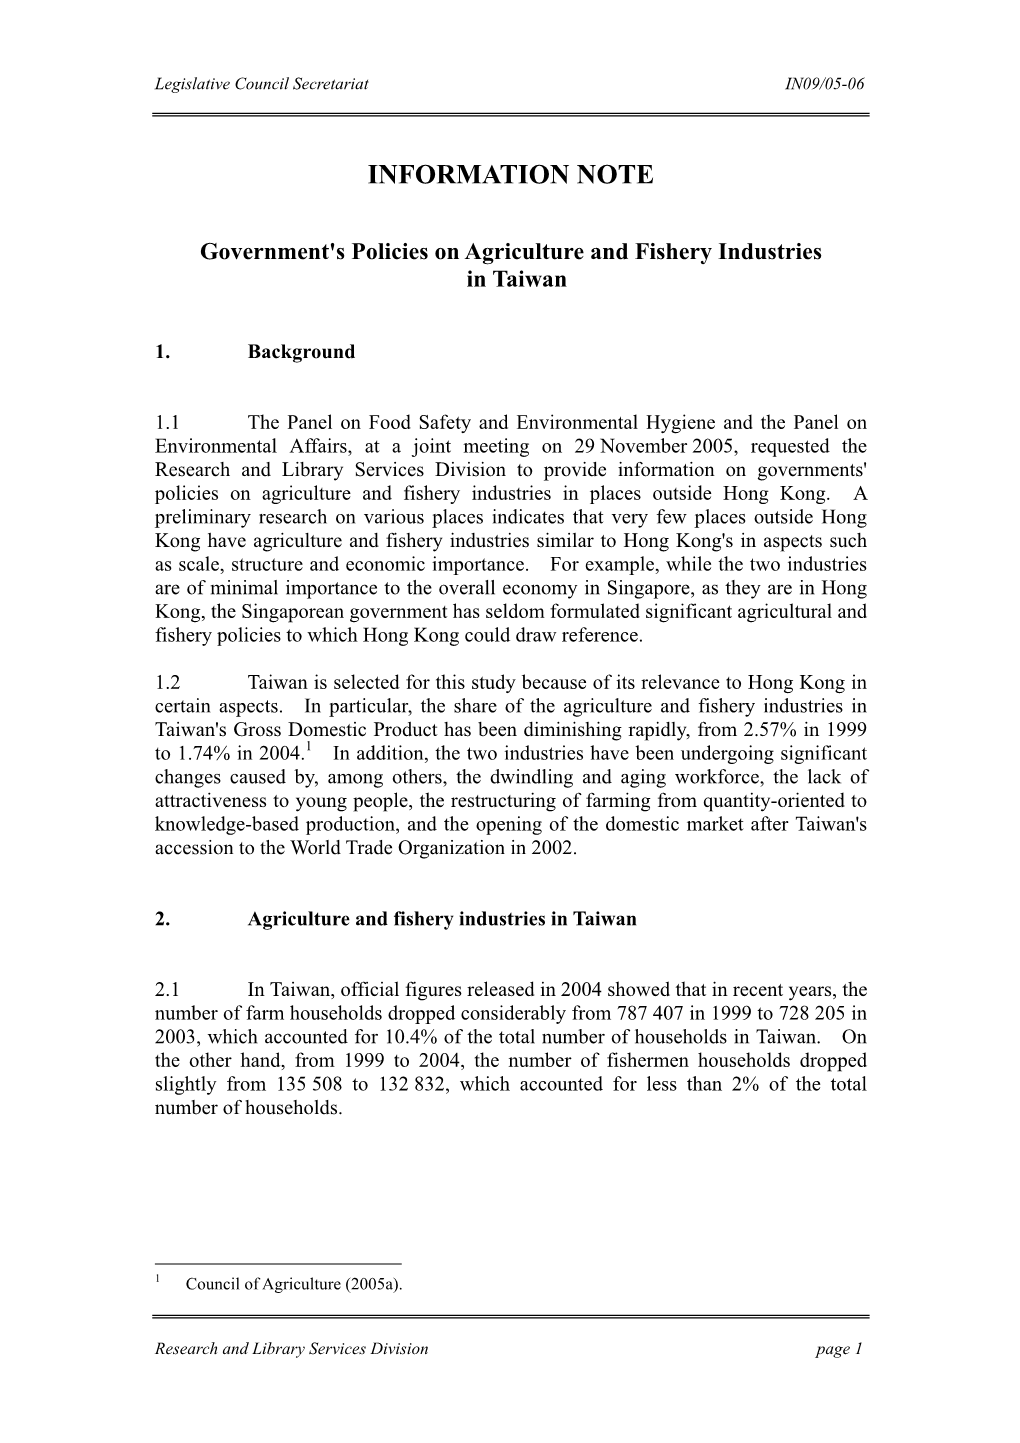 Government's Policies on Agriculture and Fishery Industries in Taiwan